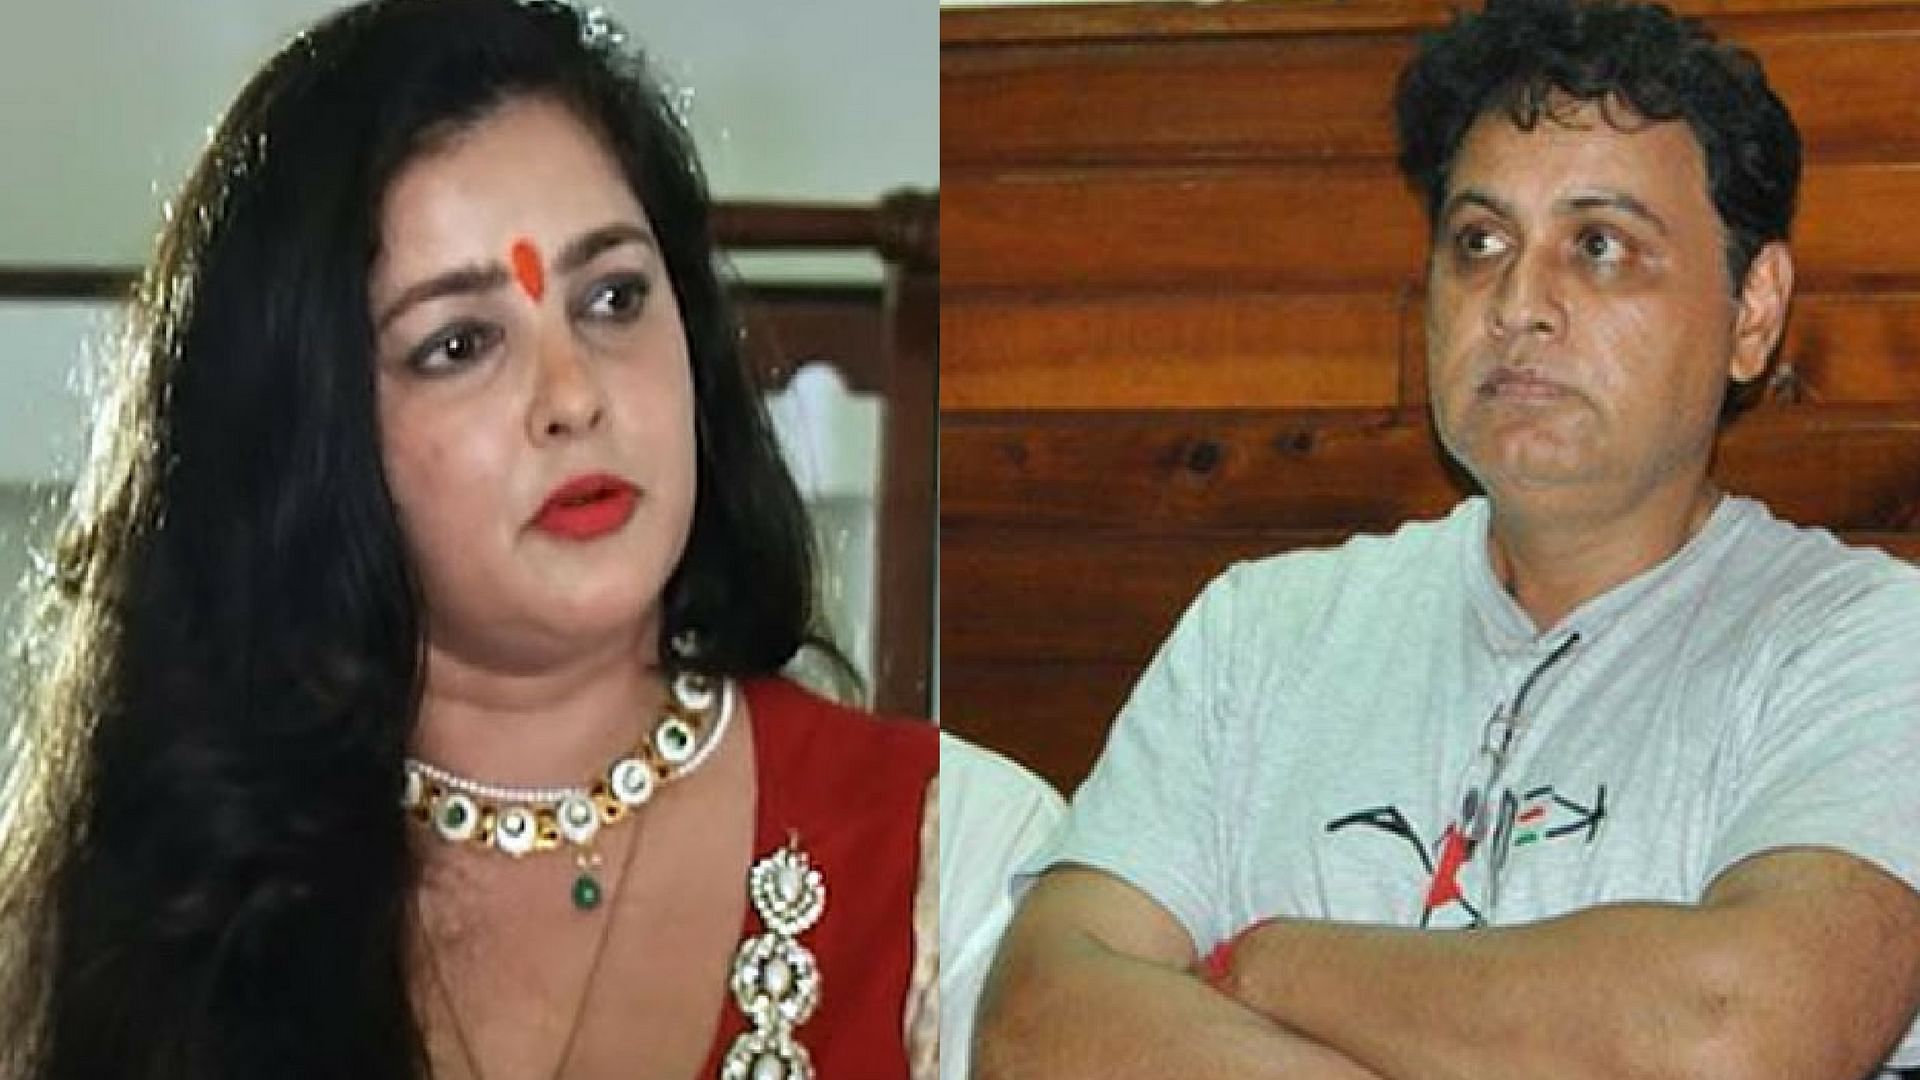 Mamta Kulkarni and Vicky Goswami. (Photo courtesy: YouTube Screenshot/ <a href="https://twitter.com/search?f=images&amp;vertical=default&amp;q=vicky%20goswami&amp;src=typd">Twitter/ @bollywoodmantra</a>)